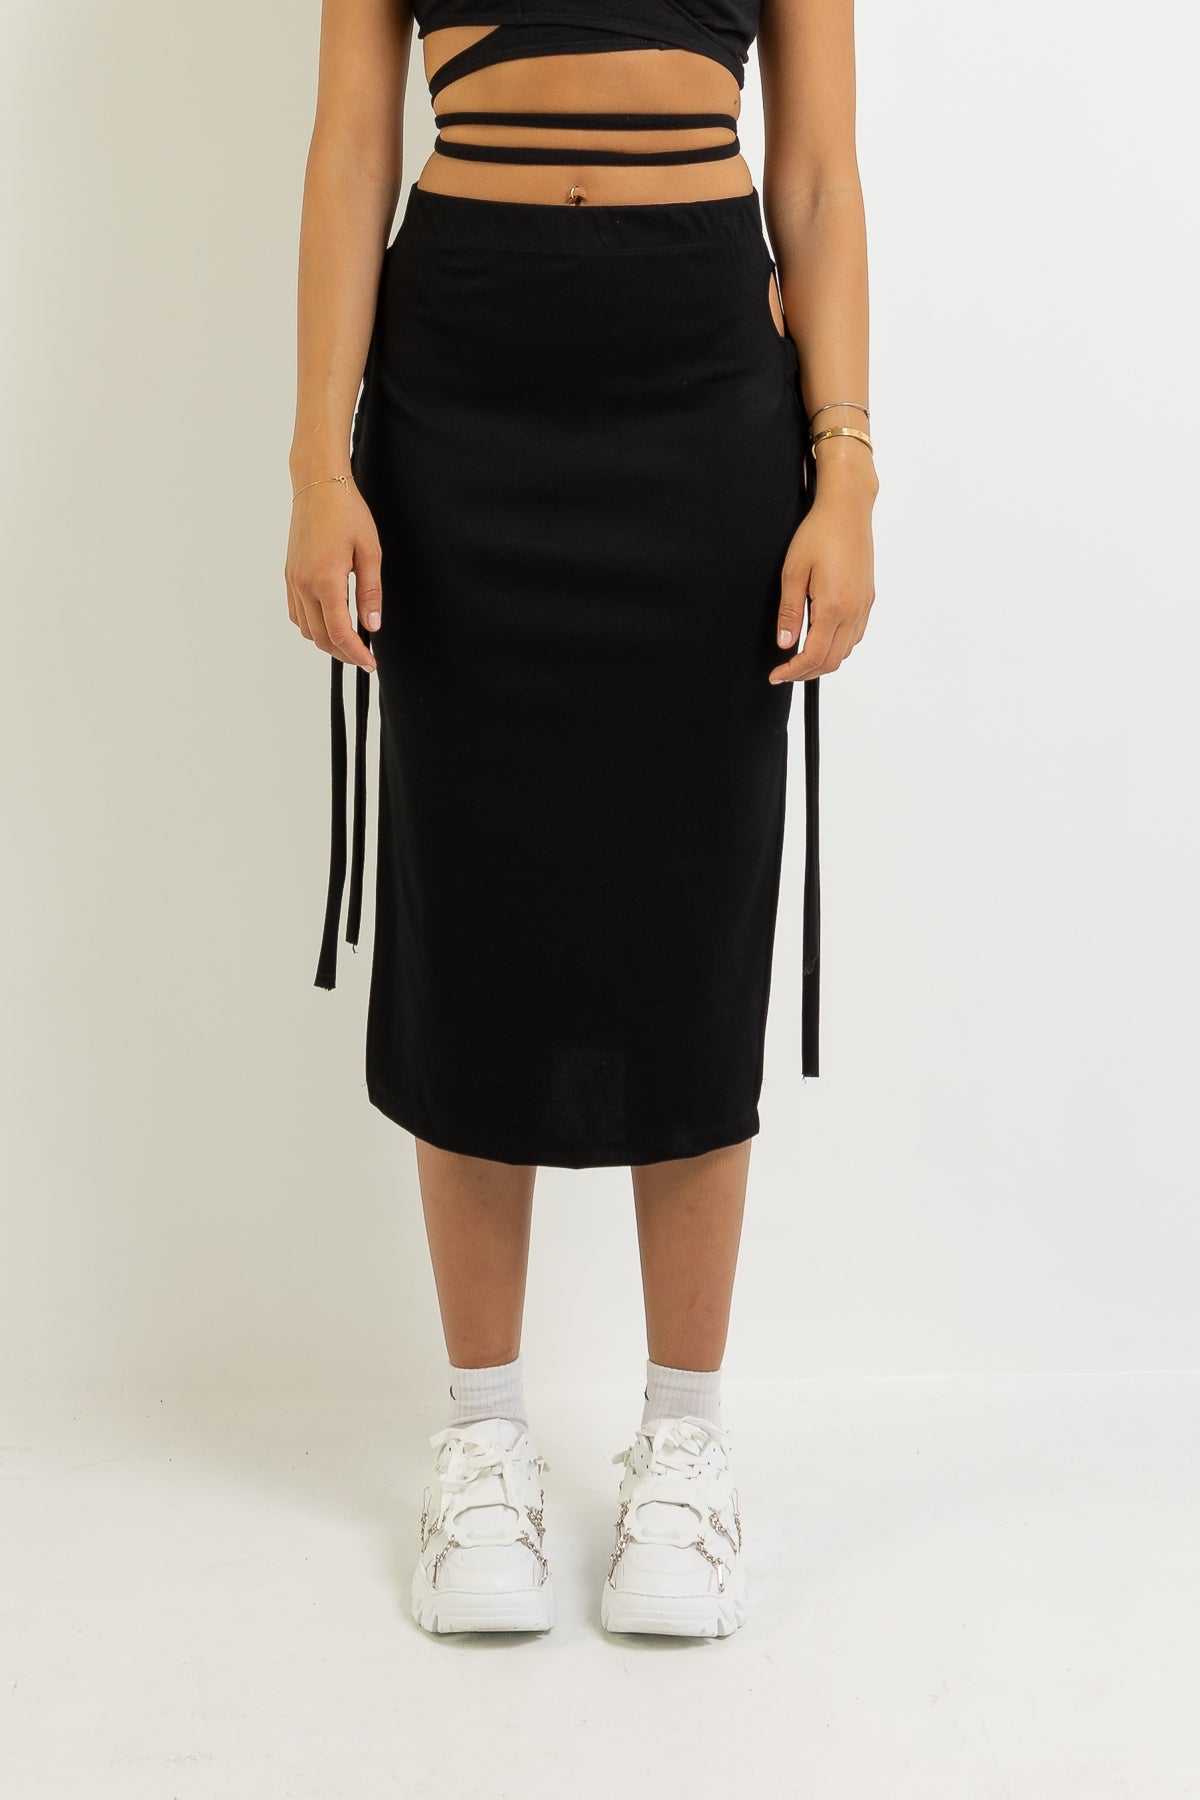 HEBE LACE UP SKIRT